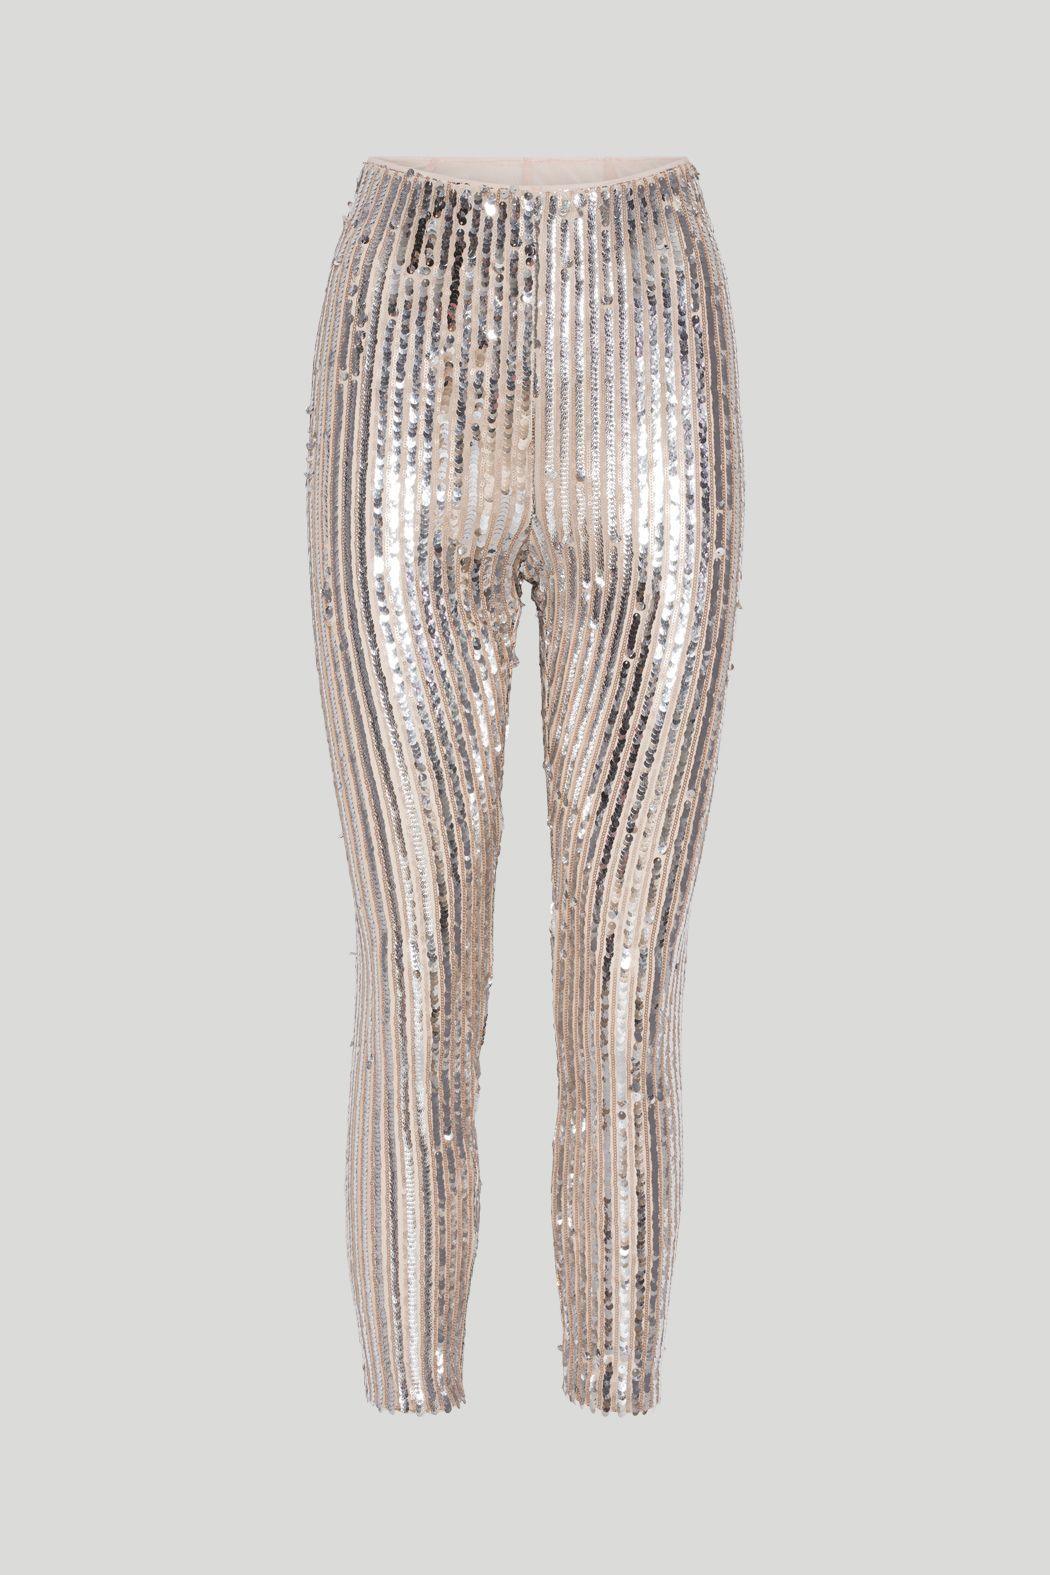 Rotate Remain - Jean Silver Sequin Leggings - 32 The Guild 